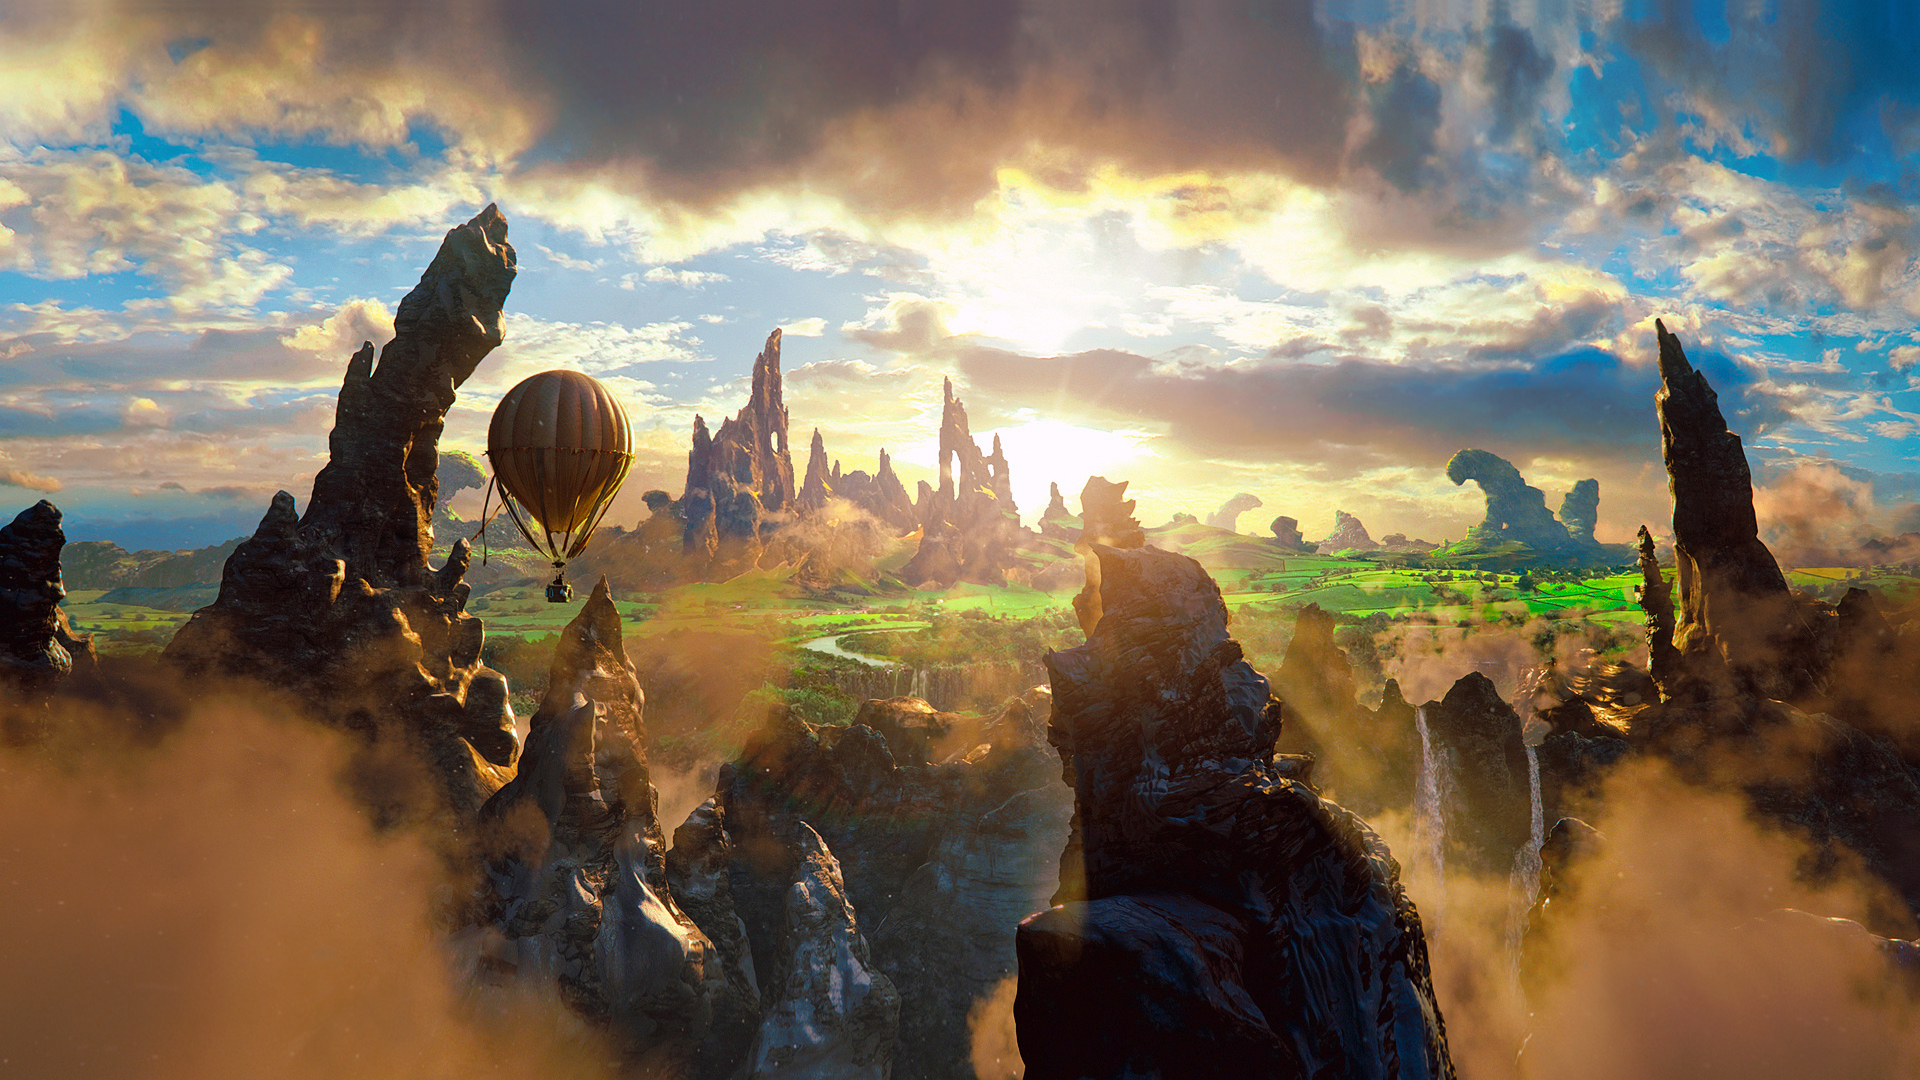 oz, The, Great, And, Powerful, 2013, Movie, Story, Air, Balloon, Clouds, Rock, Fantasy, Beauty, Magic Wallpaper